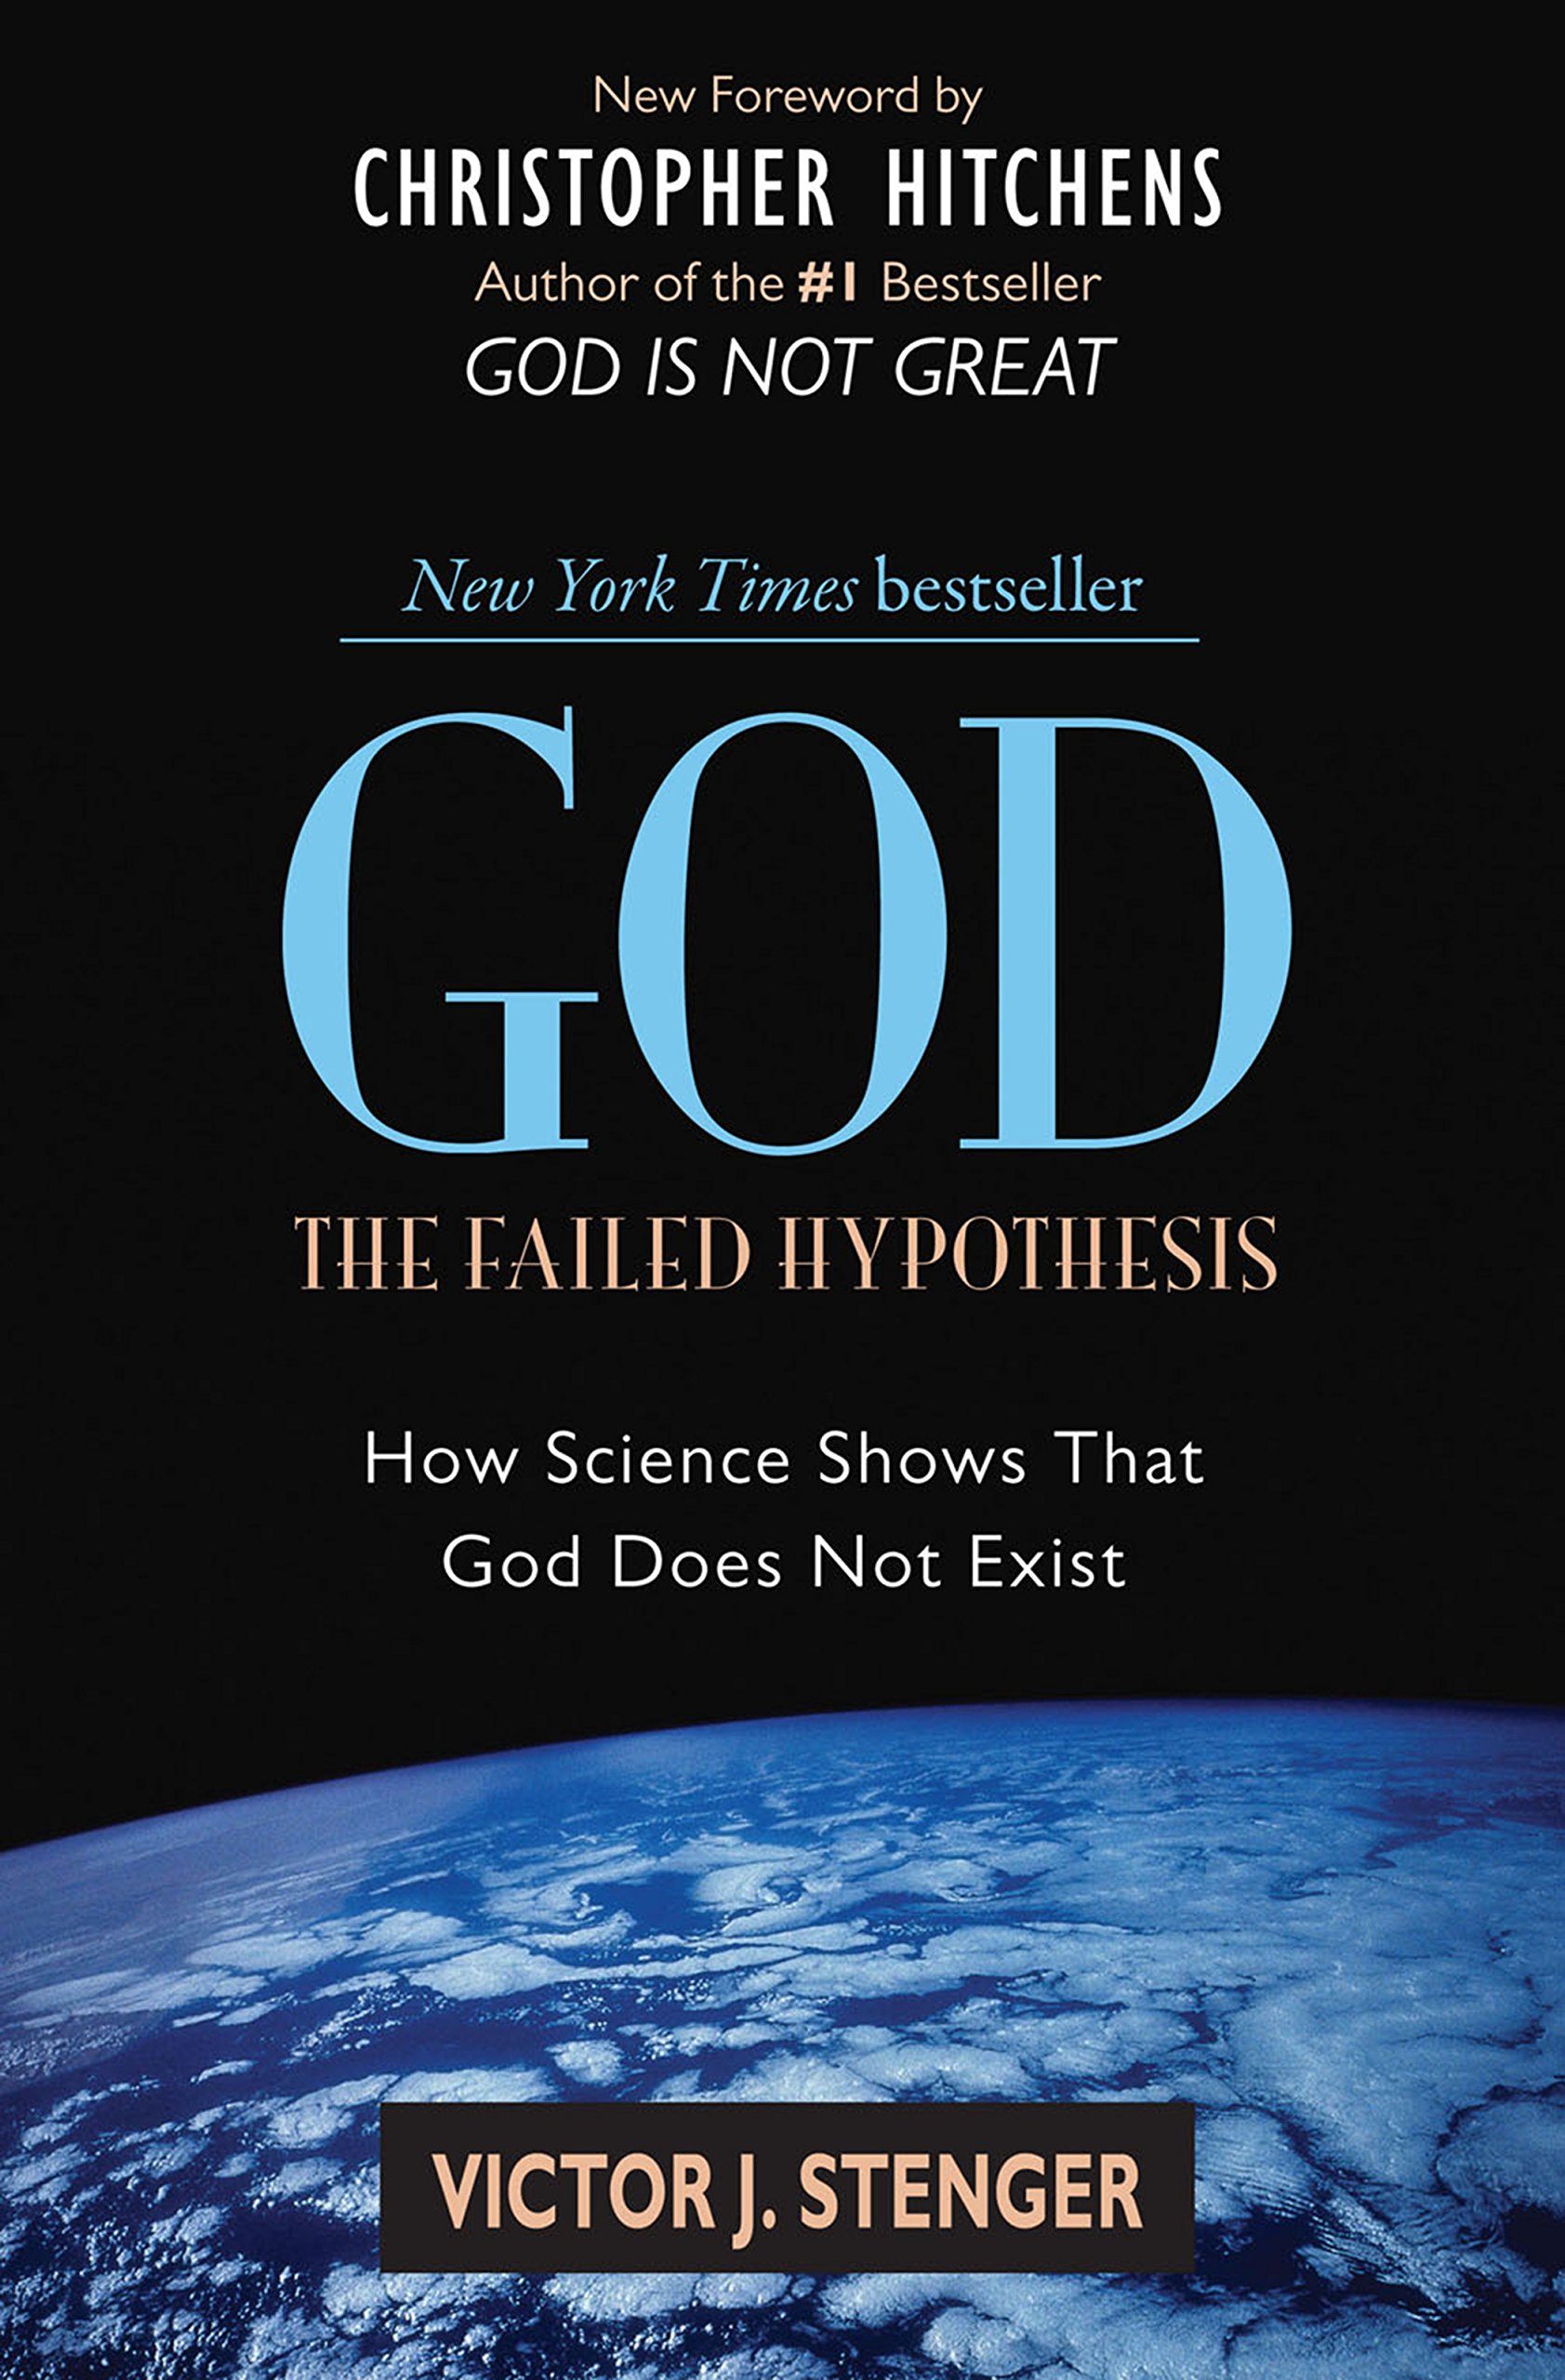 God: The Failed Hypothesis: How Science Shows That God Does Not Exist